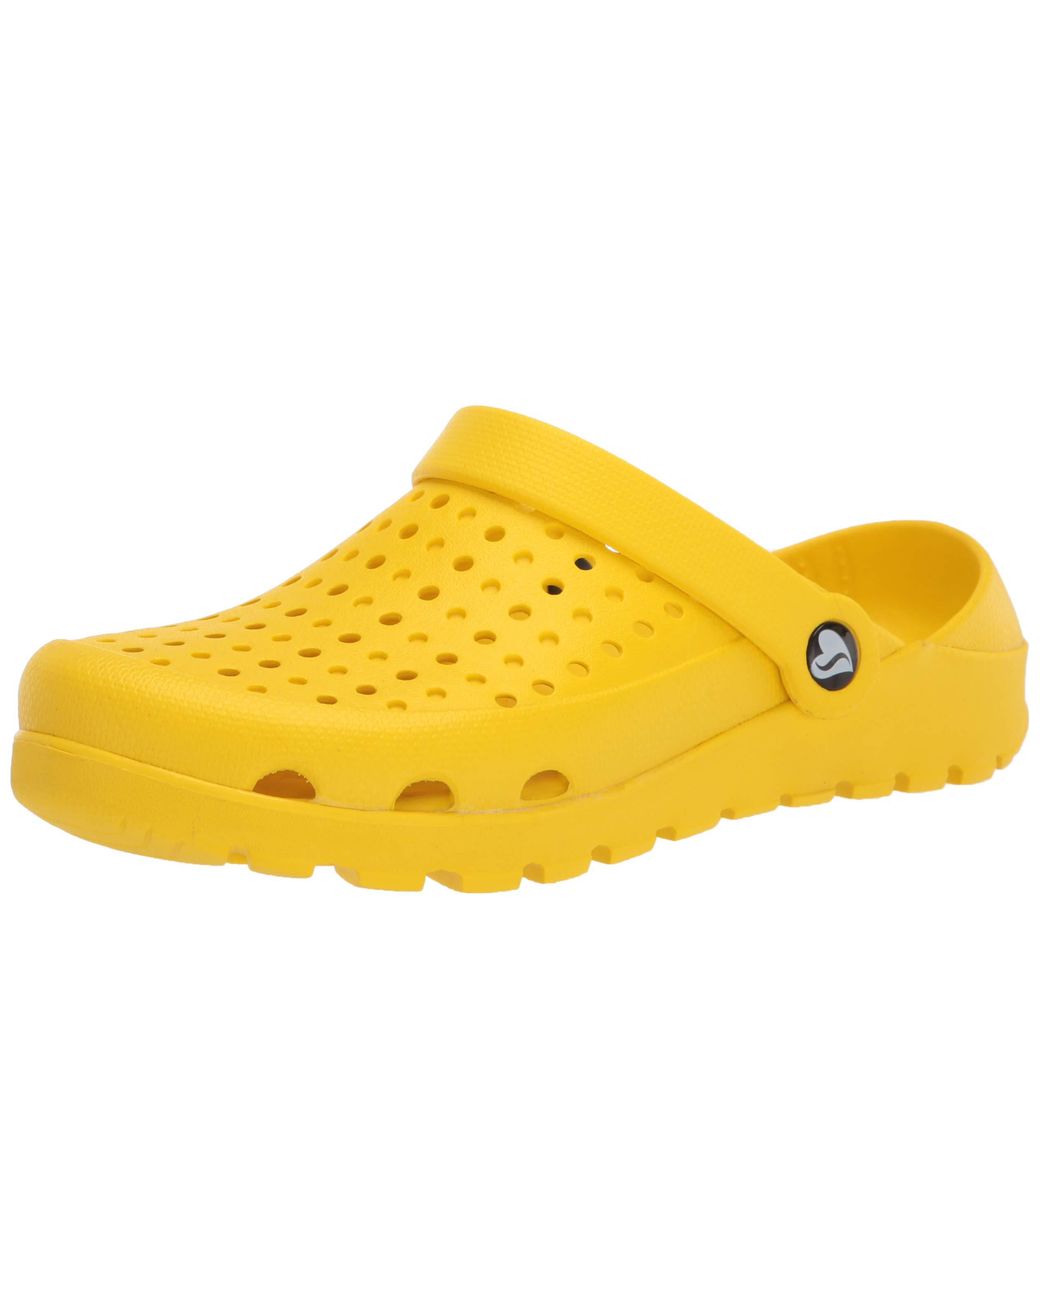 Skechers Cali Gear Clog in Taupe (Yellow) - Save 6% - Lyst